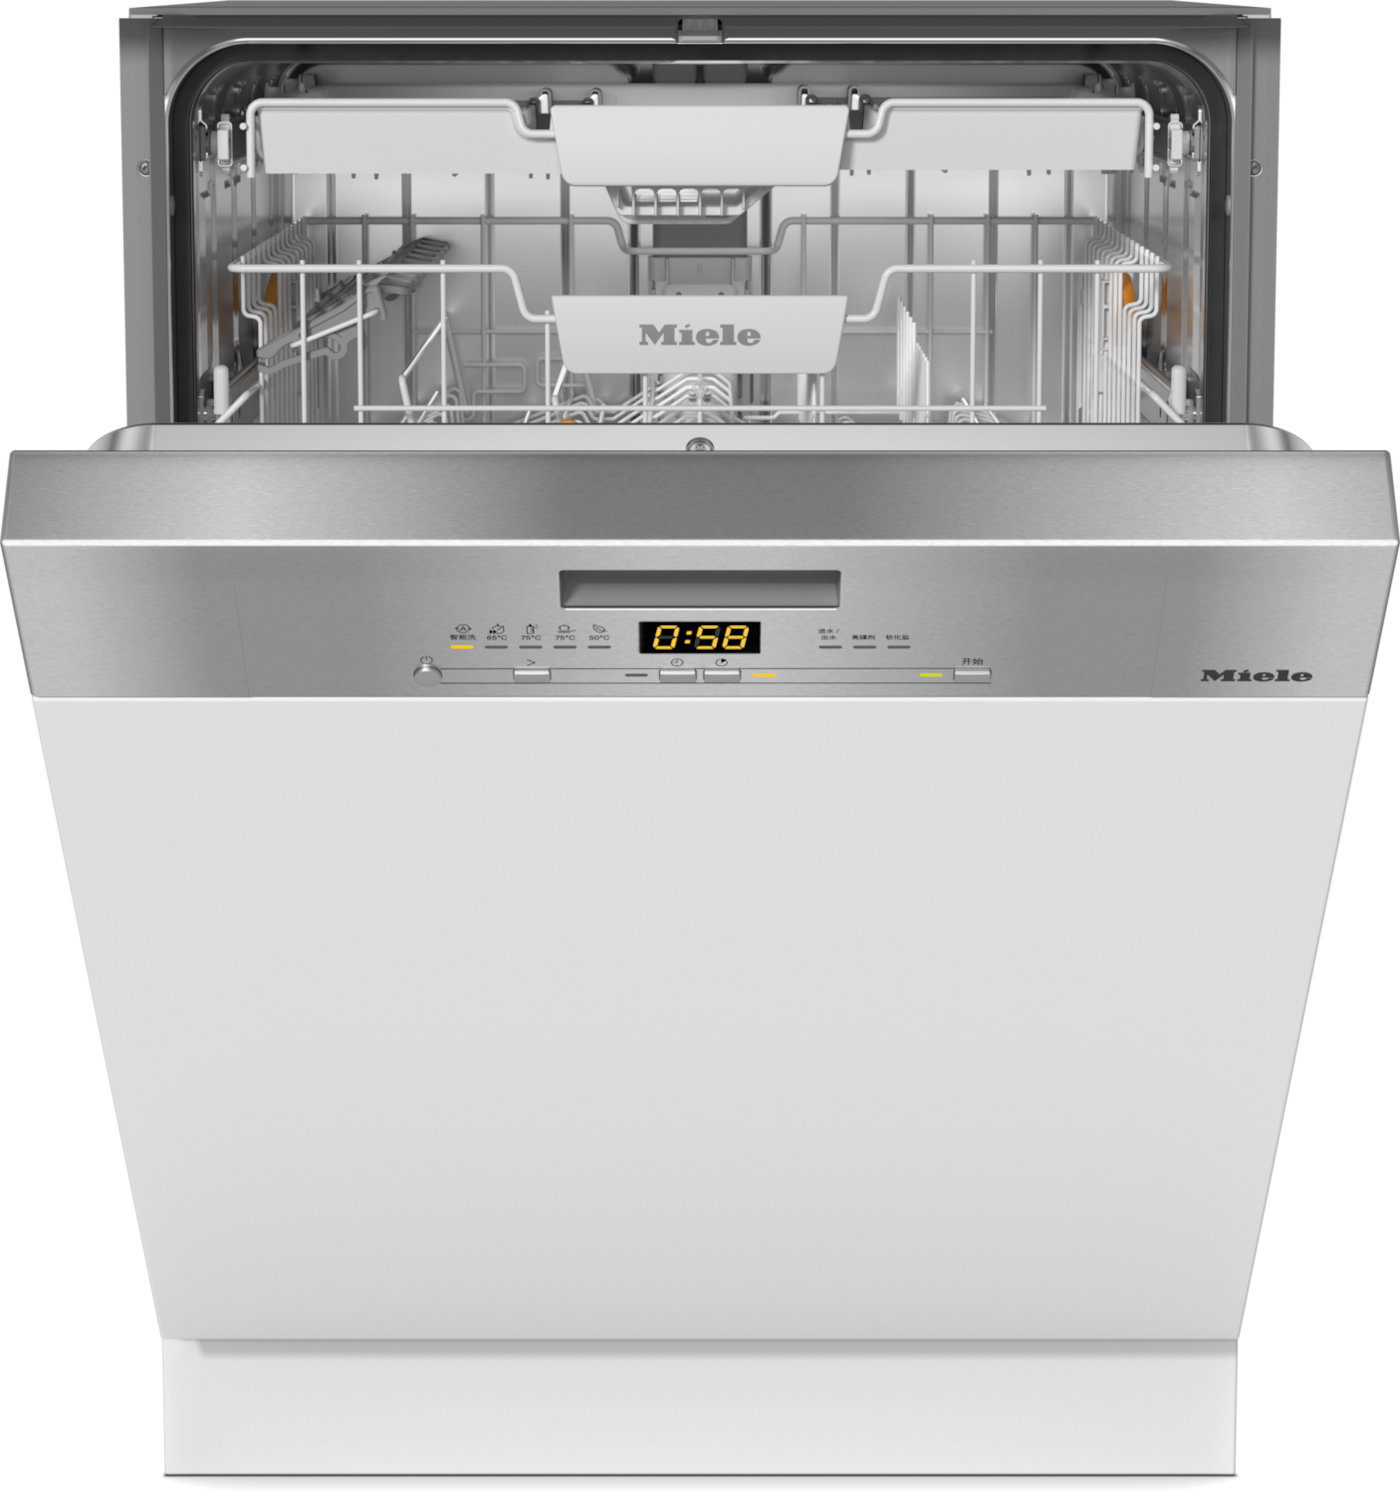 G 5000 SCi CLST Active Integrated dishwasher product photo